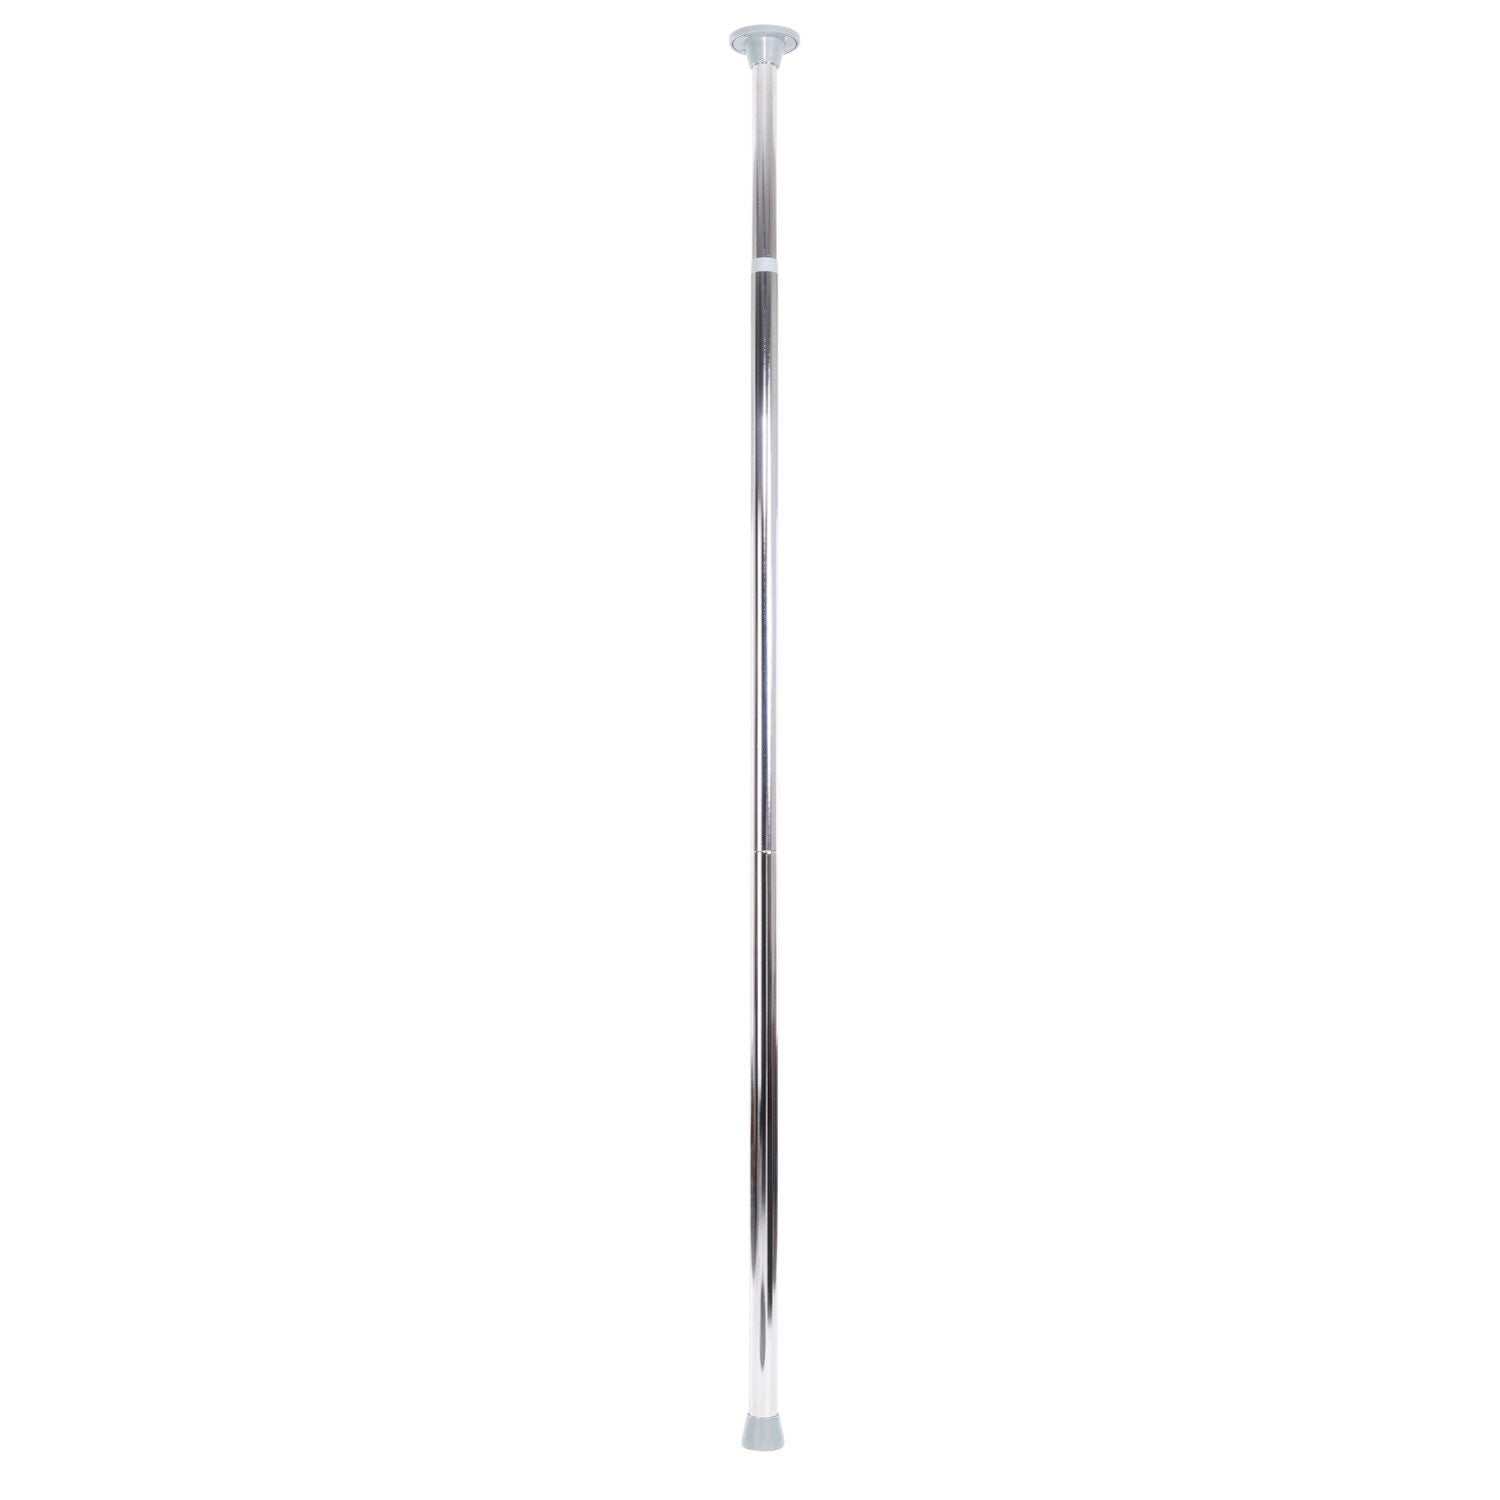 Fetish Fantasy Series fetish fantasy Series Fantasy Dance Pole - Metal Pole by Pipedream